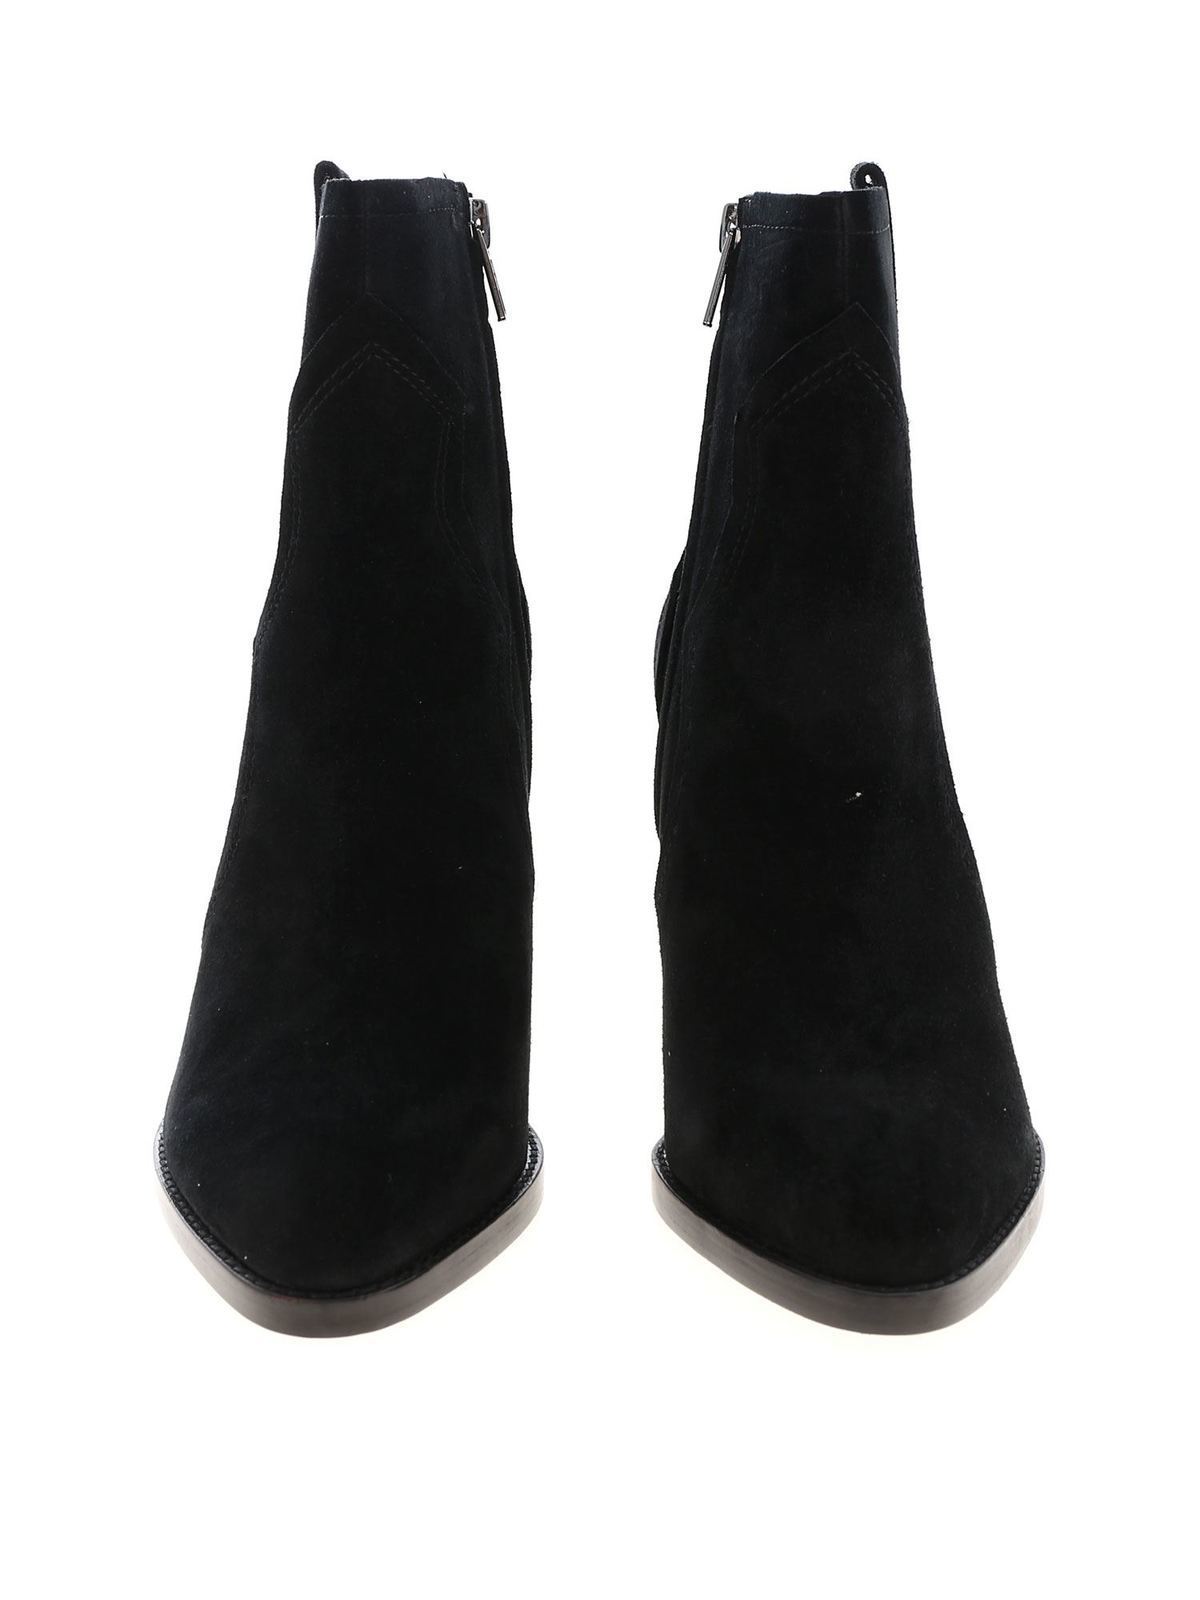 Esquire ankle boots in black suede 